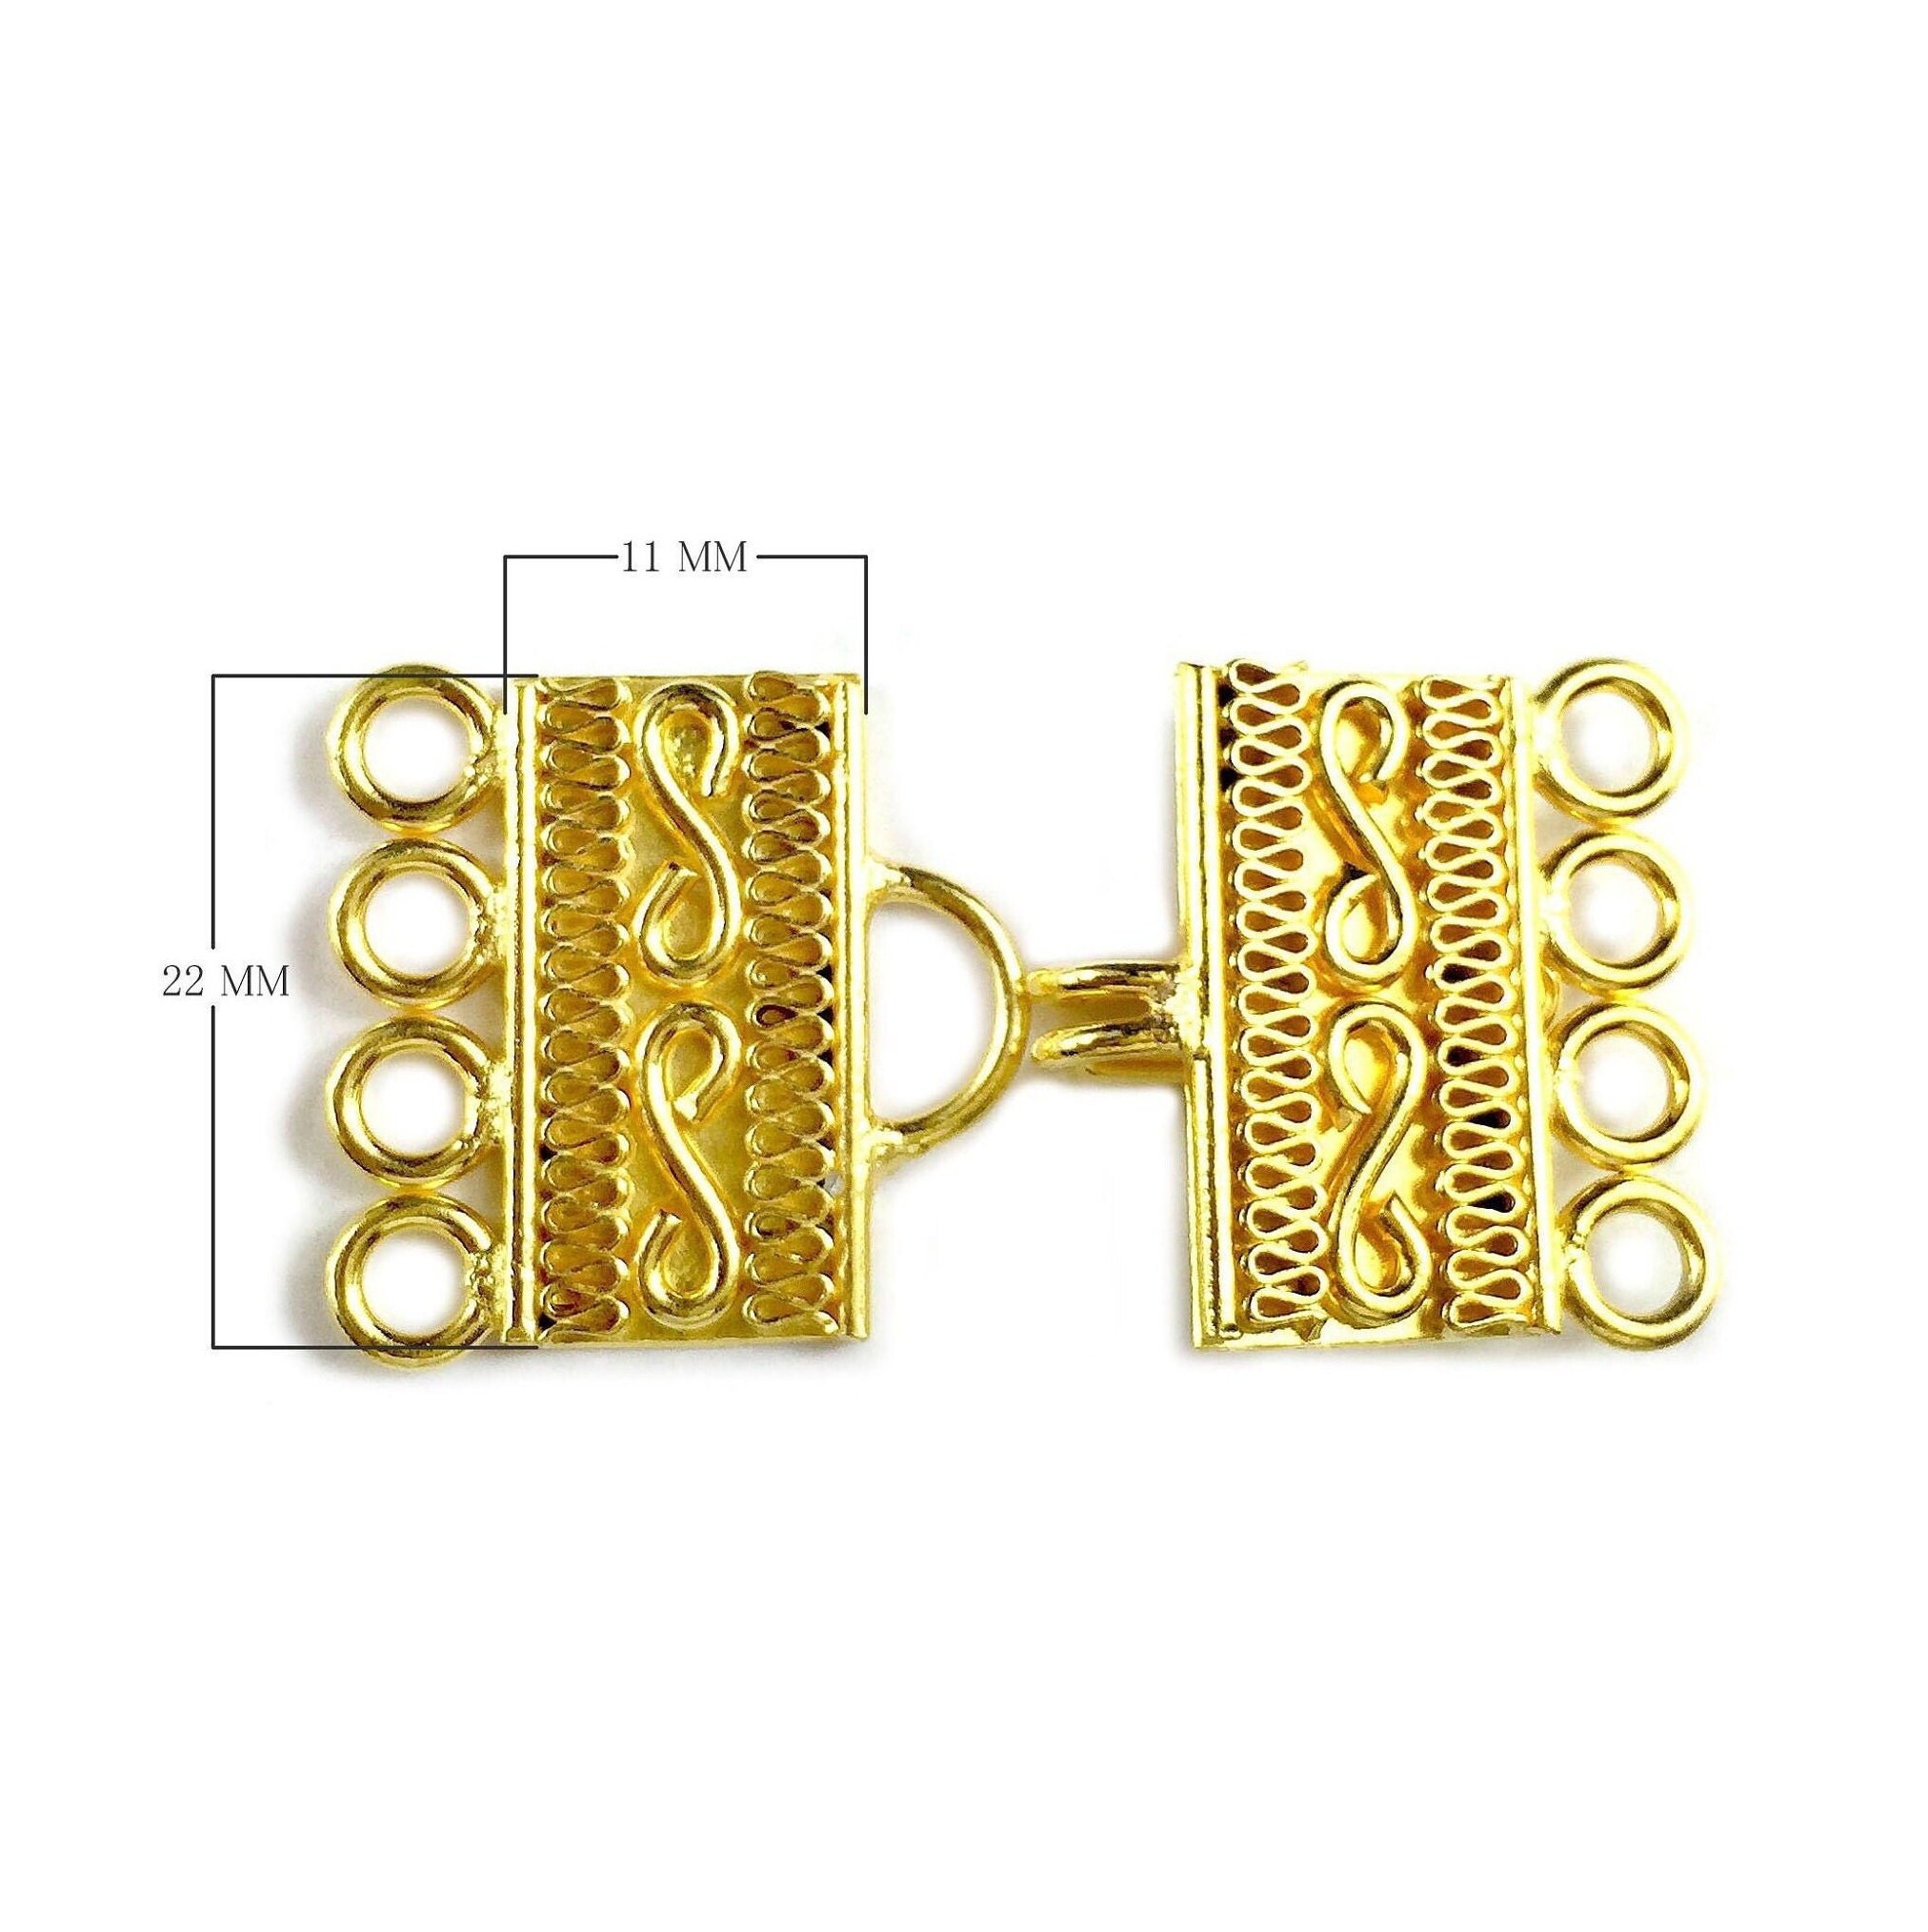 14K MULTI-STRAND CLASP - BEST FOR NECKLACE LAYERS | Judith Poe Design